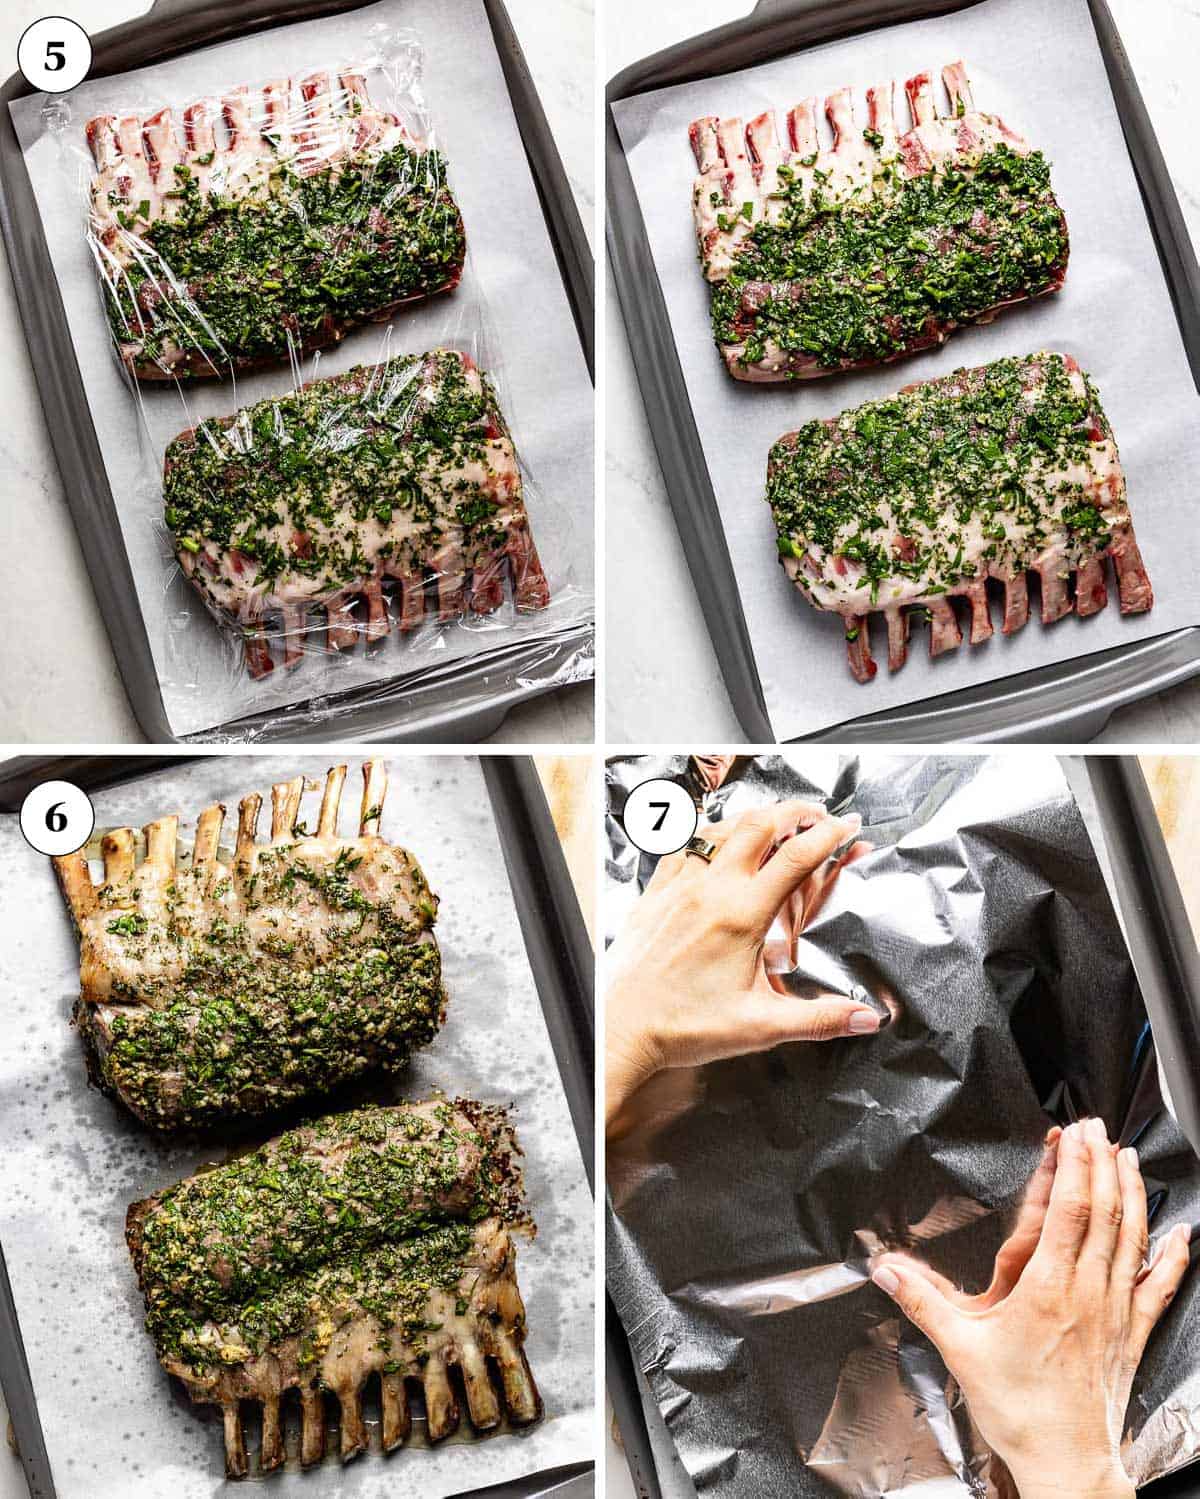 Marinated rack of lamb before and after it is baked in the oven in a collage of images.